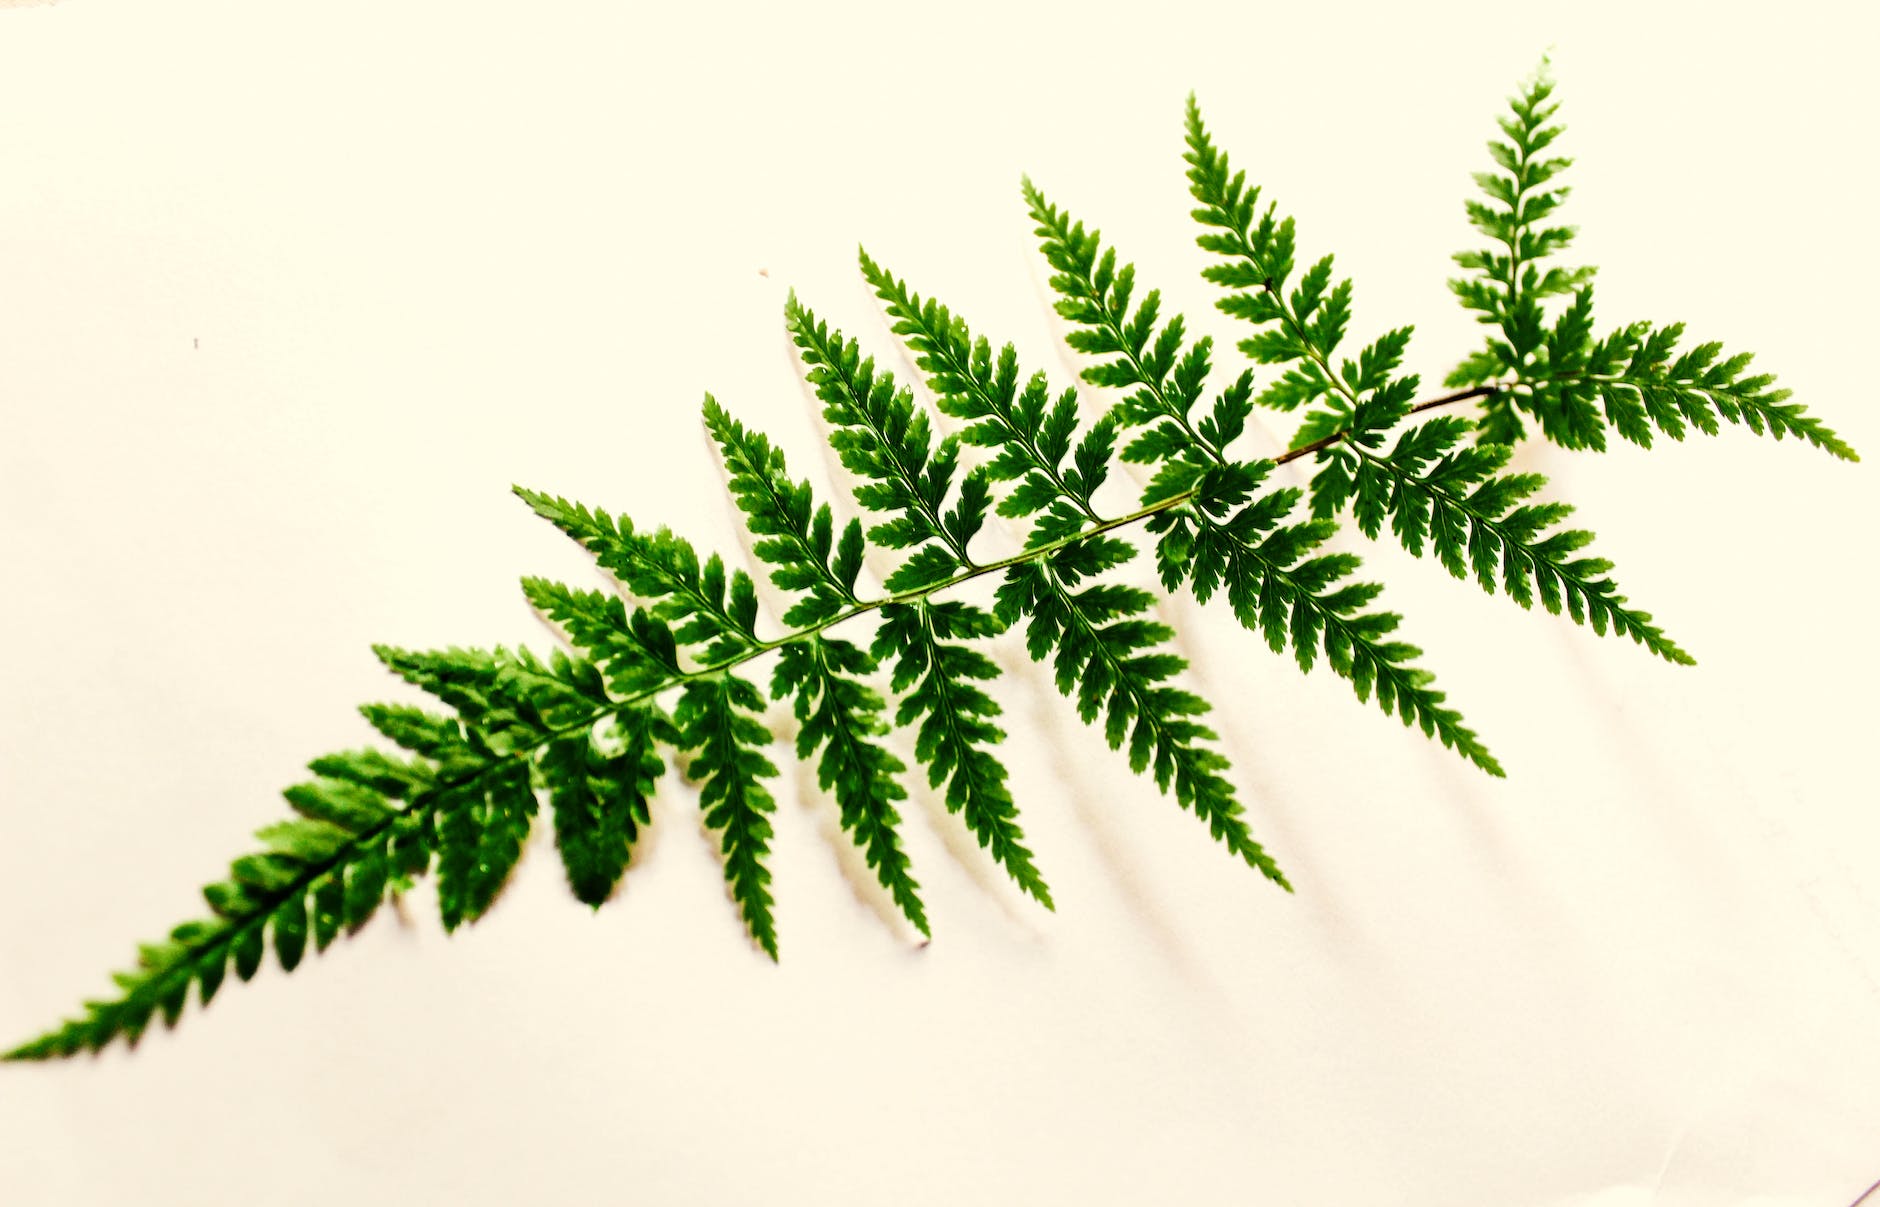 Ferns: The Low-Maintenance Houseplant You Need